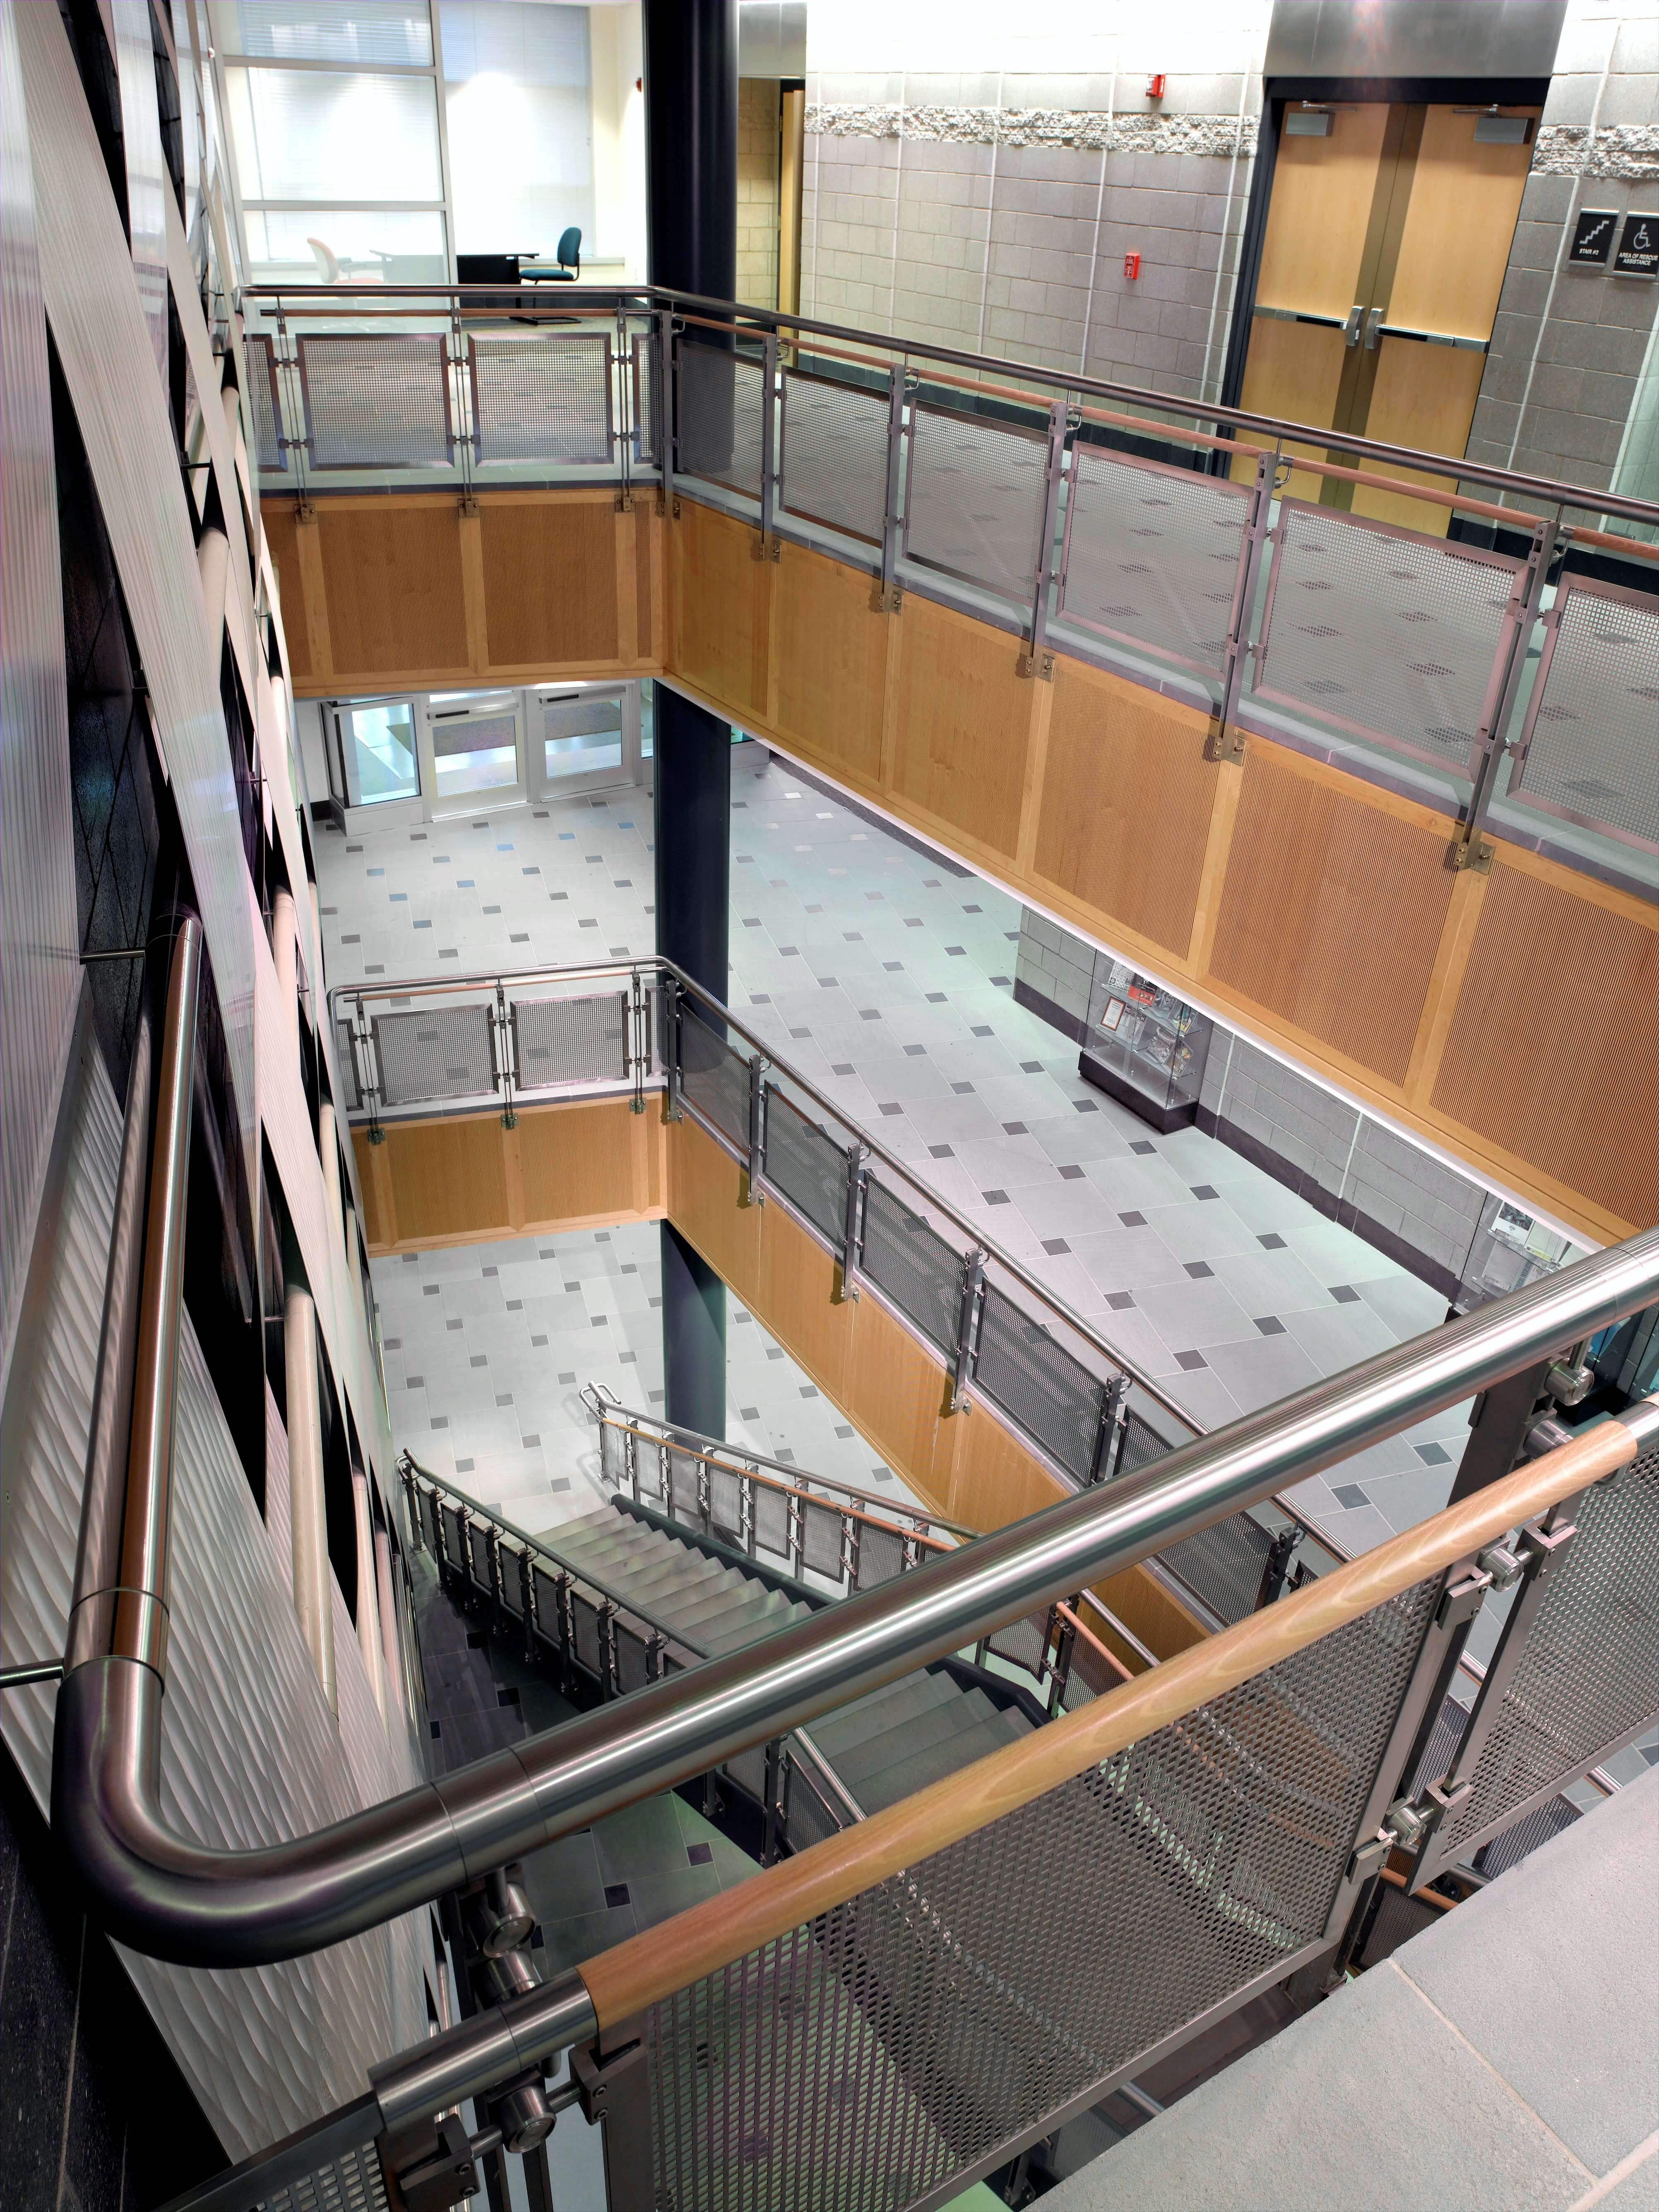 Inox guardrail with stainless steel infill installation at University of Connecticut, CT.